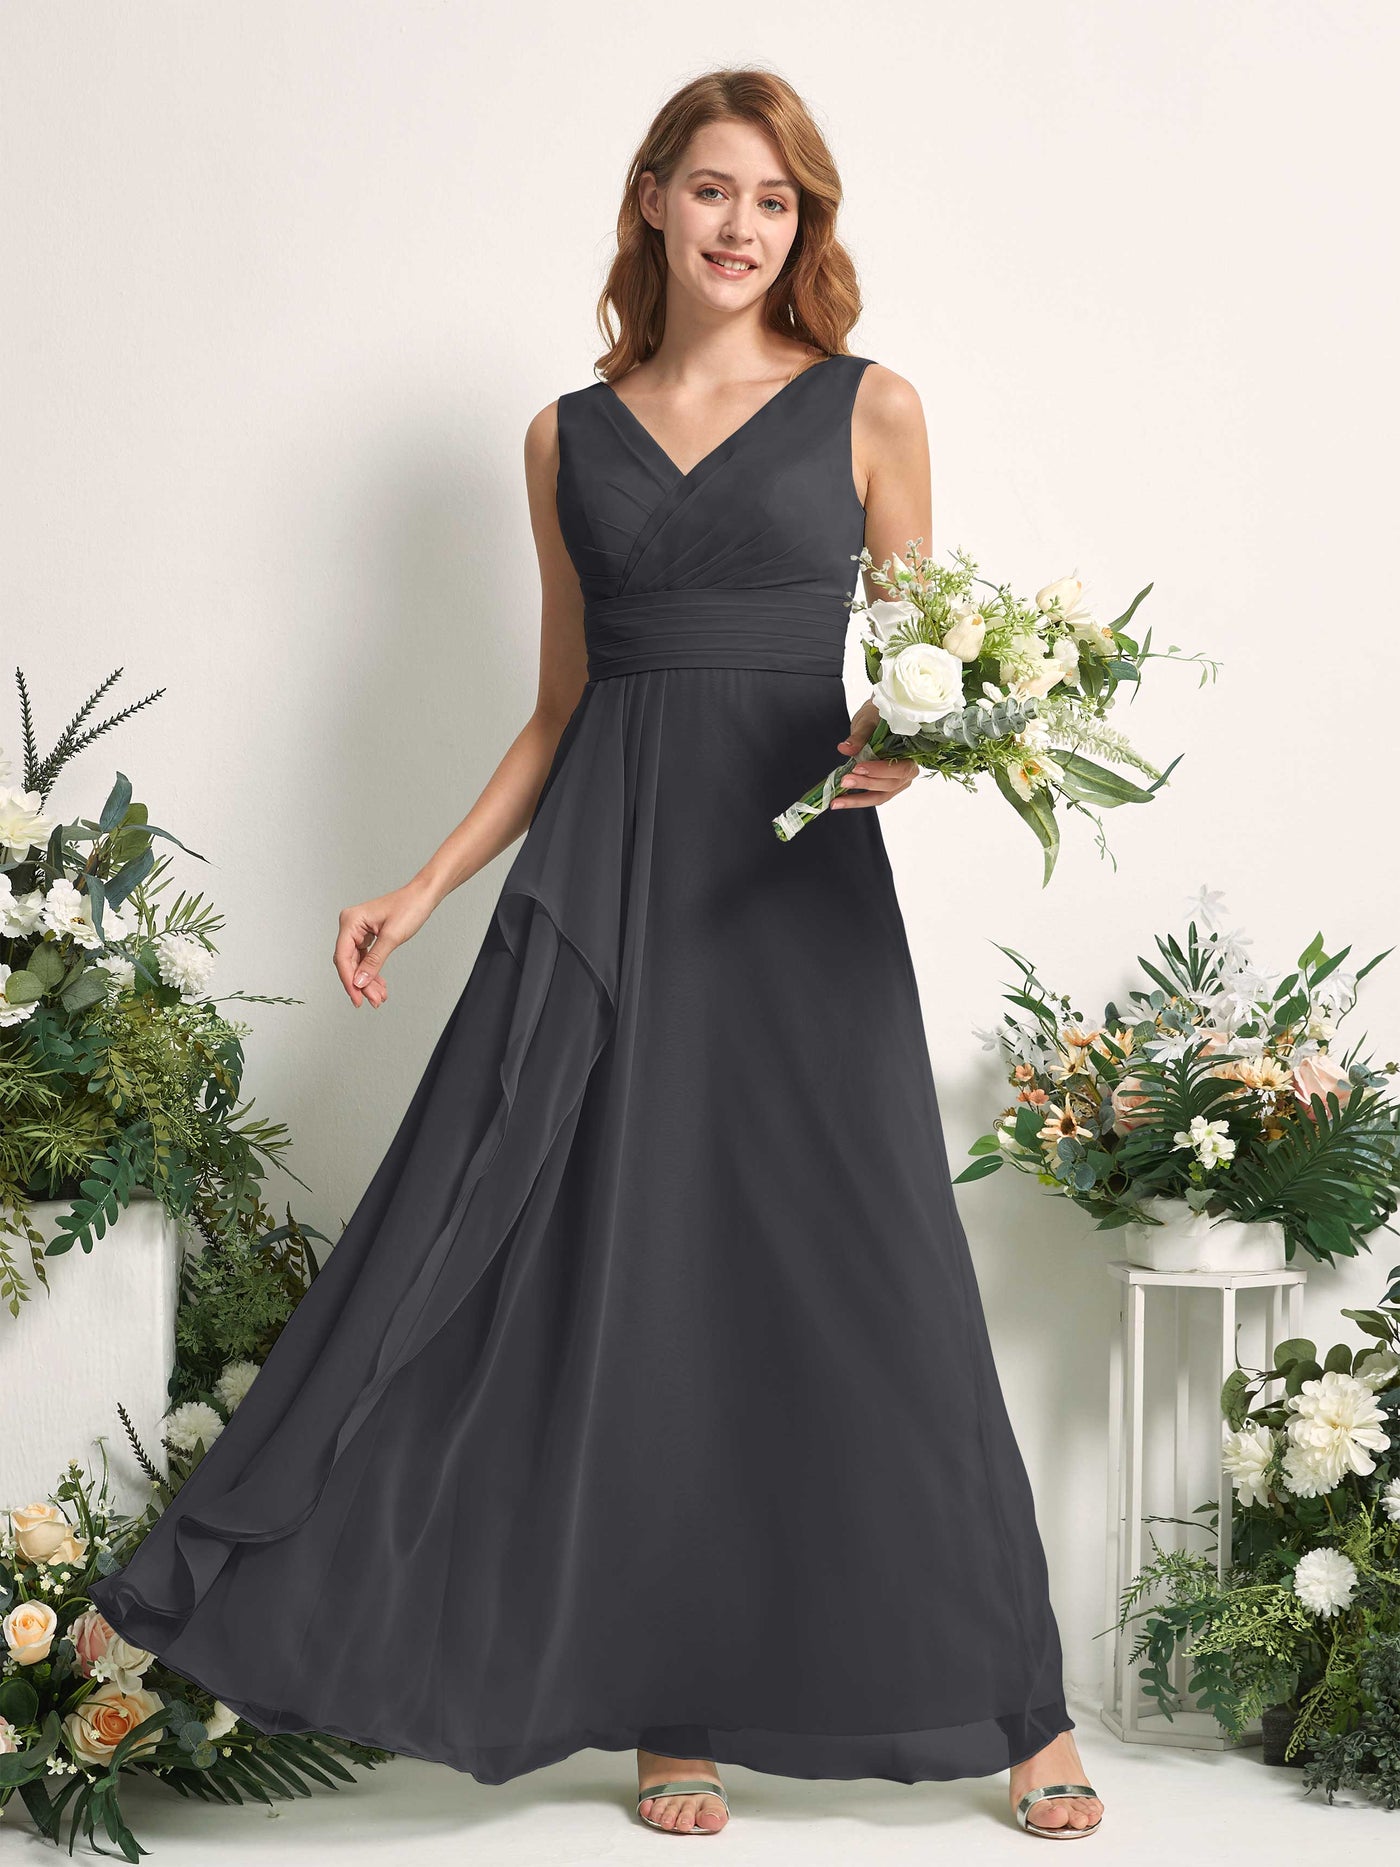 Bridesmaid Dress A-line Chiffon V-neck Full Length Sleeveless Wedding Party Dress - Pewter (81227138)#color_pewter